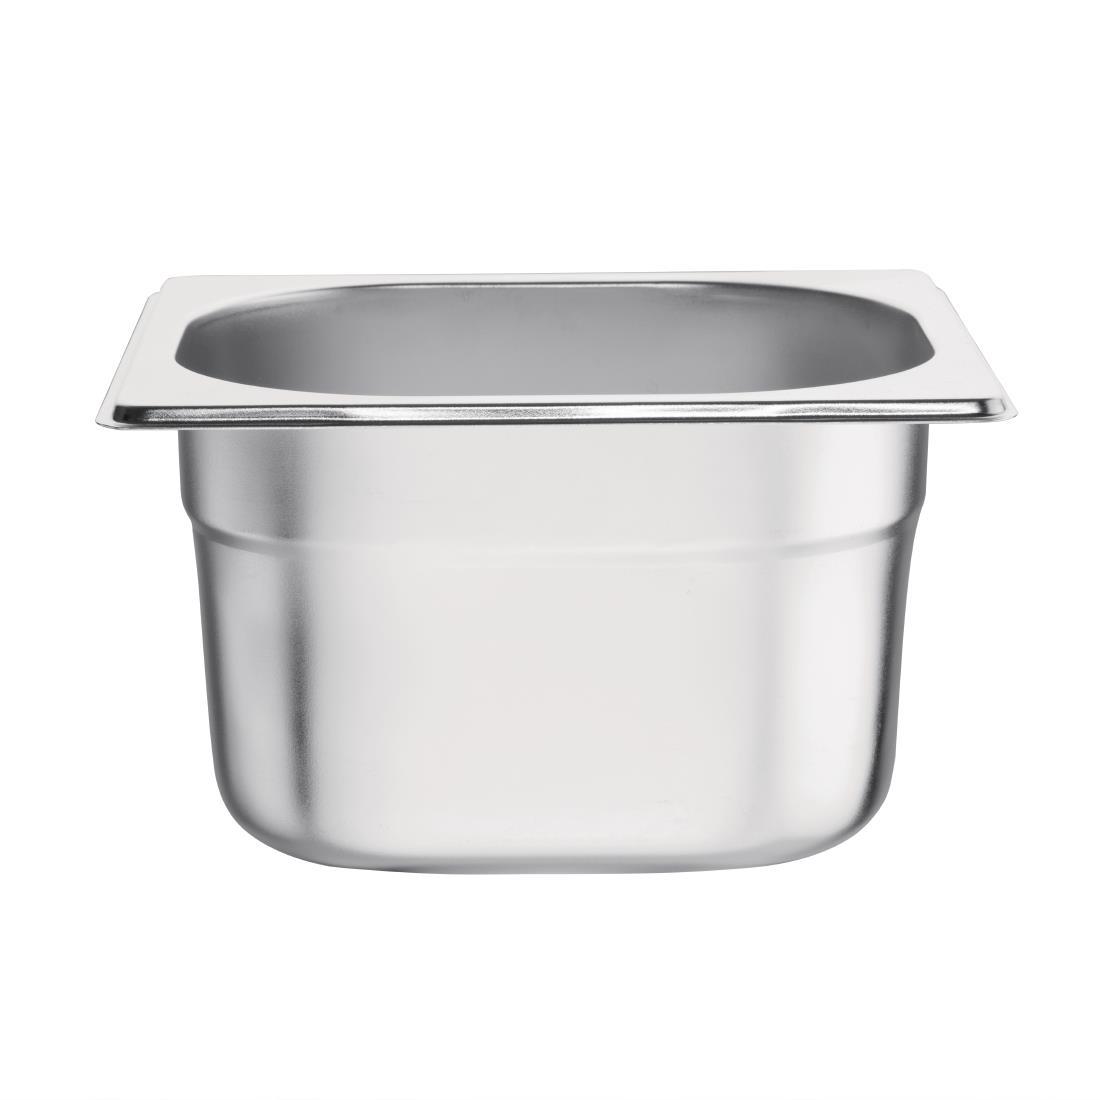 Vogue Stainless Steel 1/6 Gastronorm Pan 100mm - K991  - 2